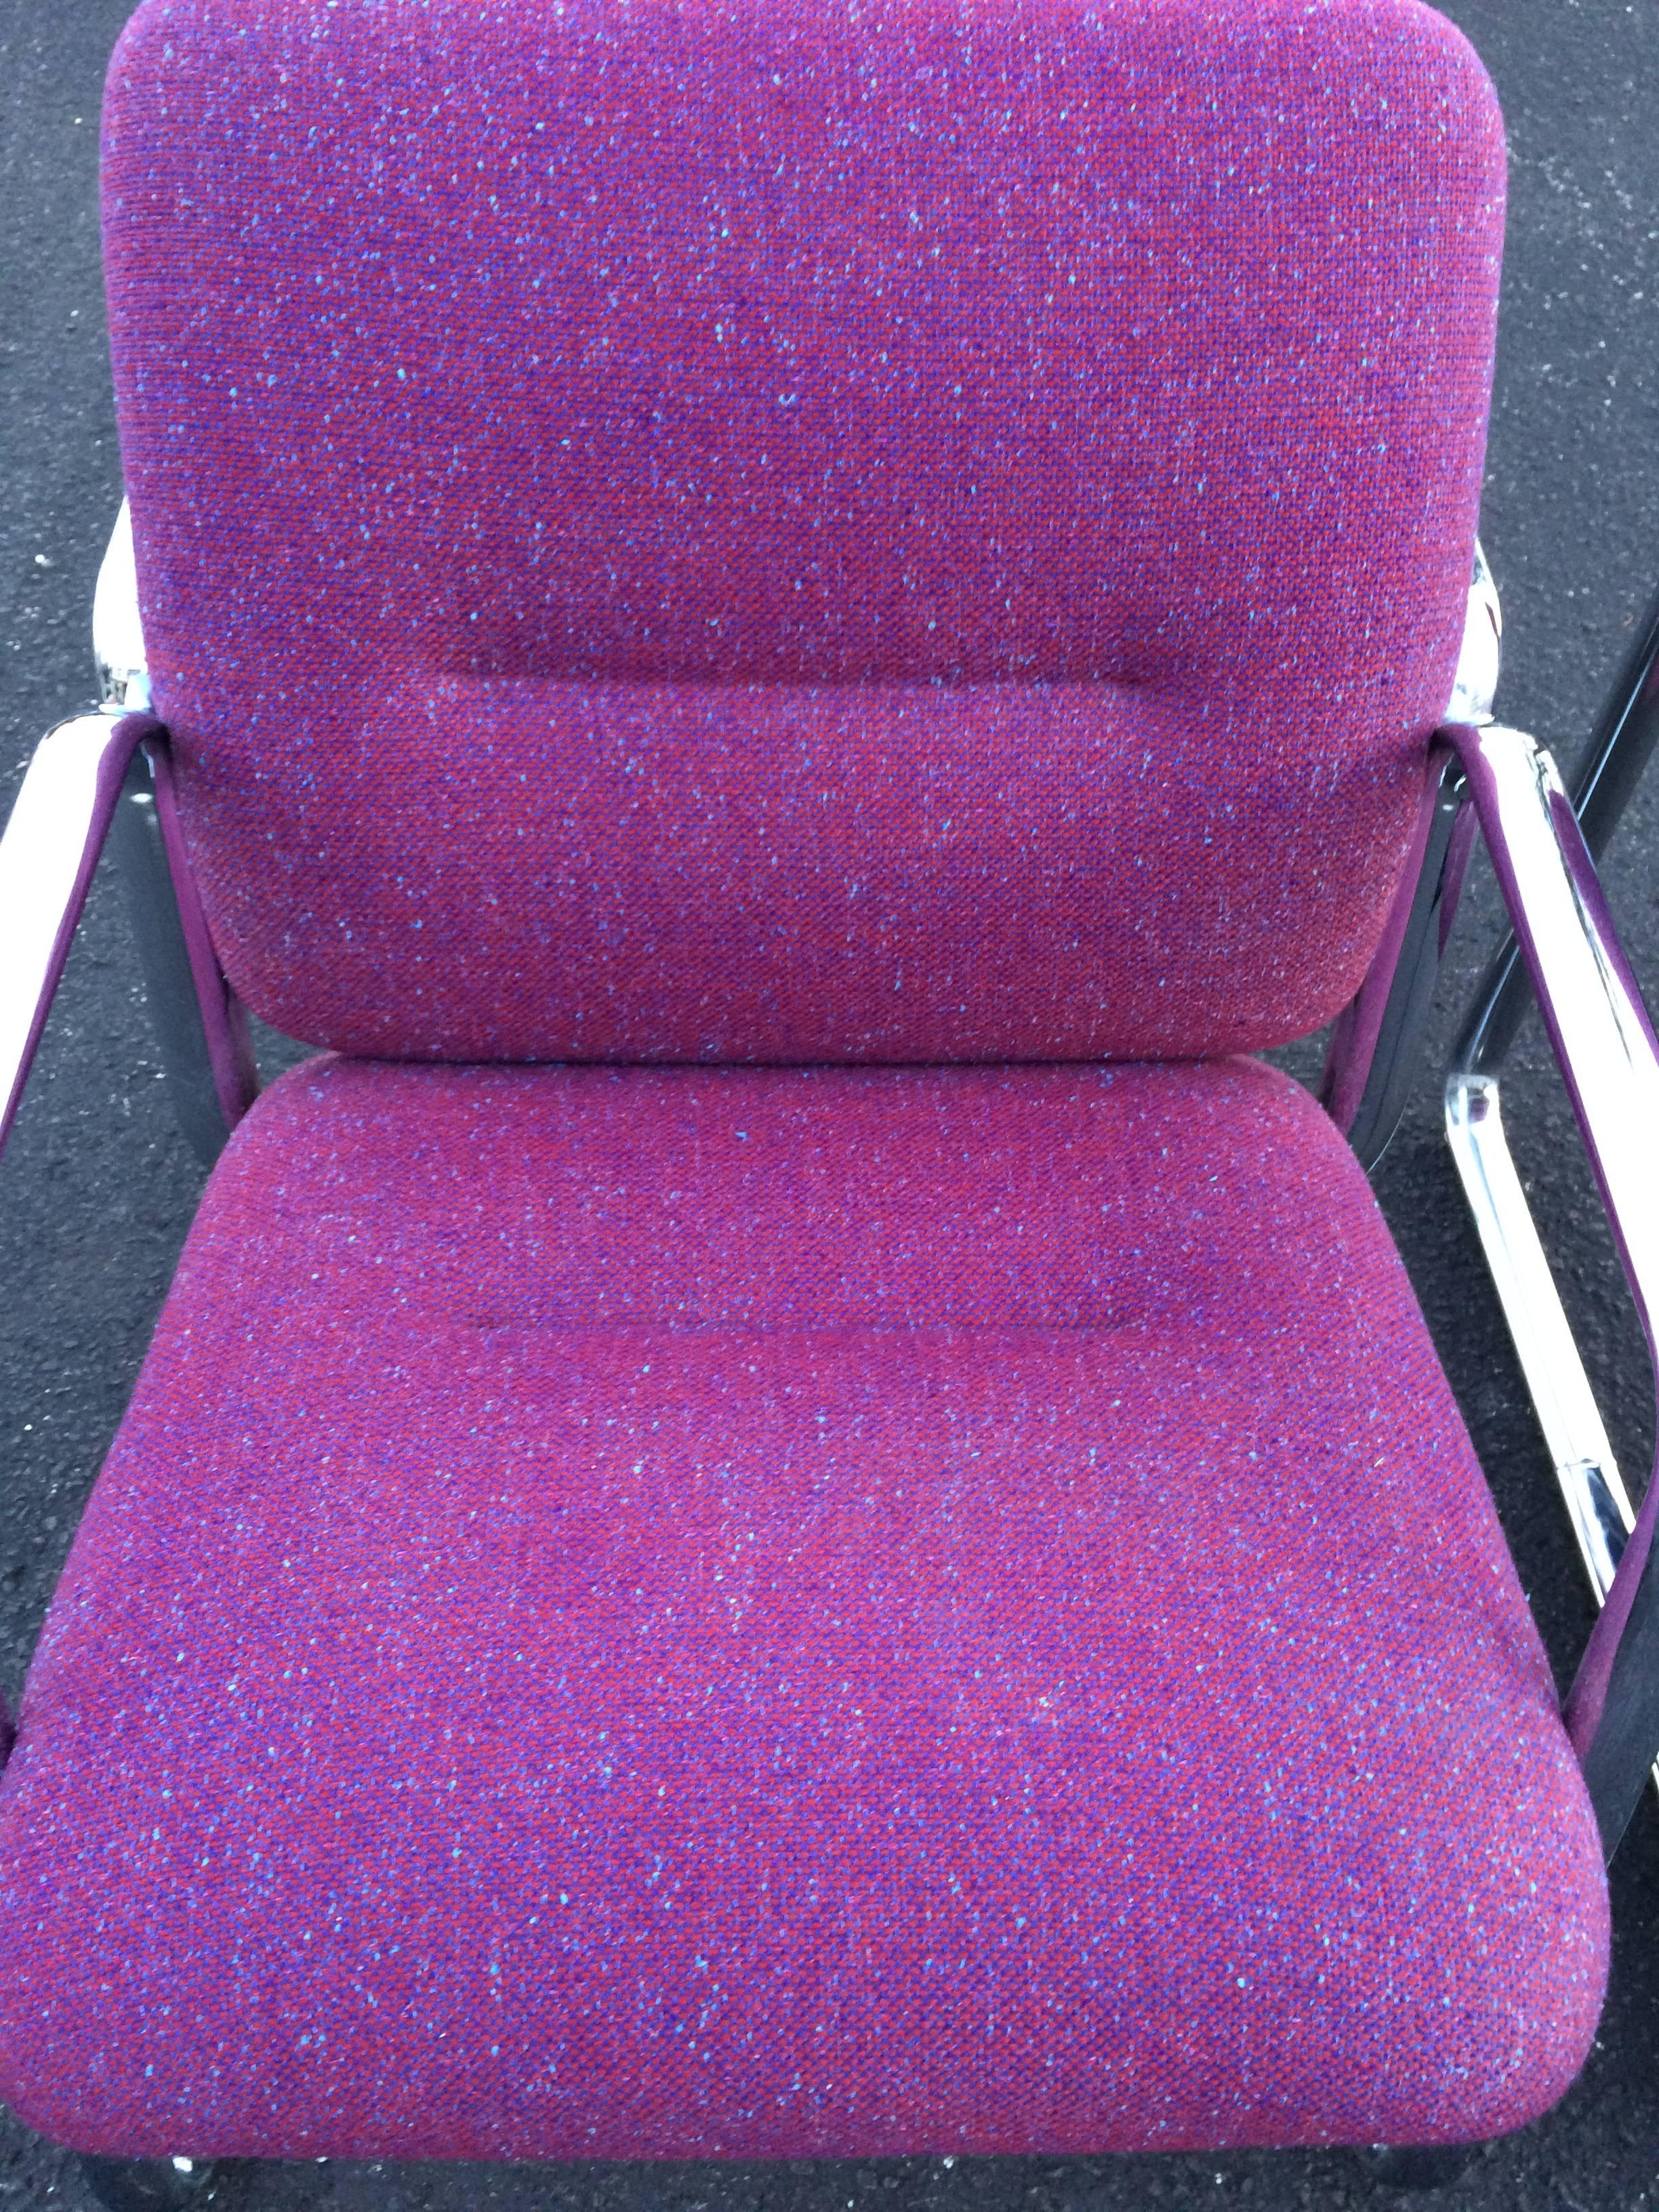 Pair of Chrome Steelcase Chairs in Violet In Excellent Condition For Sale In Redding, CT